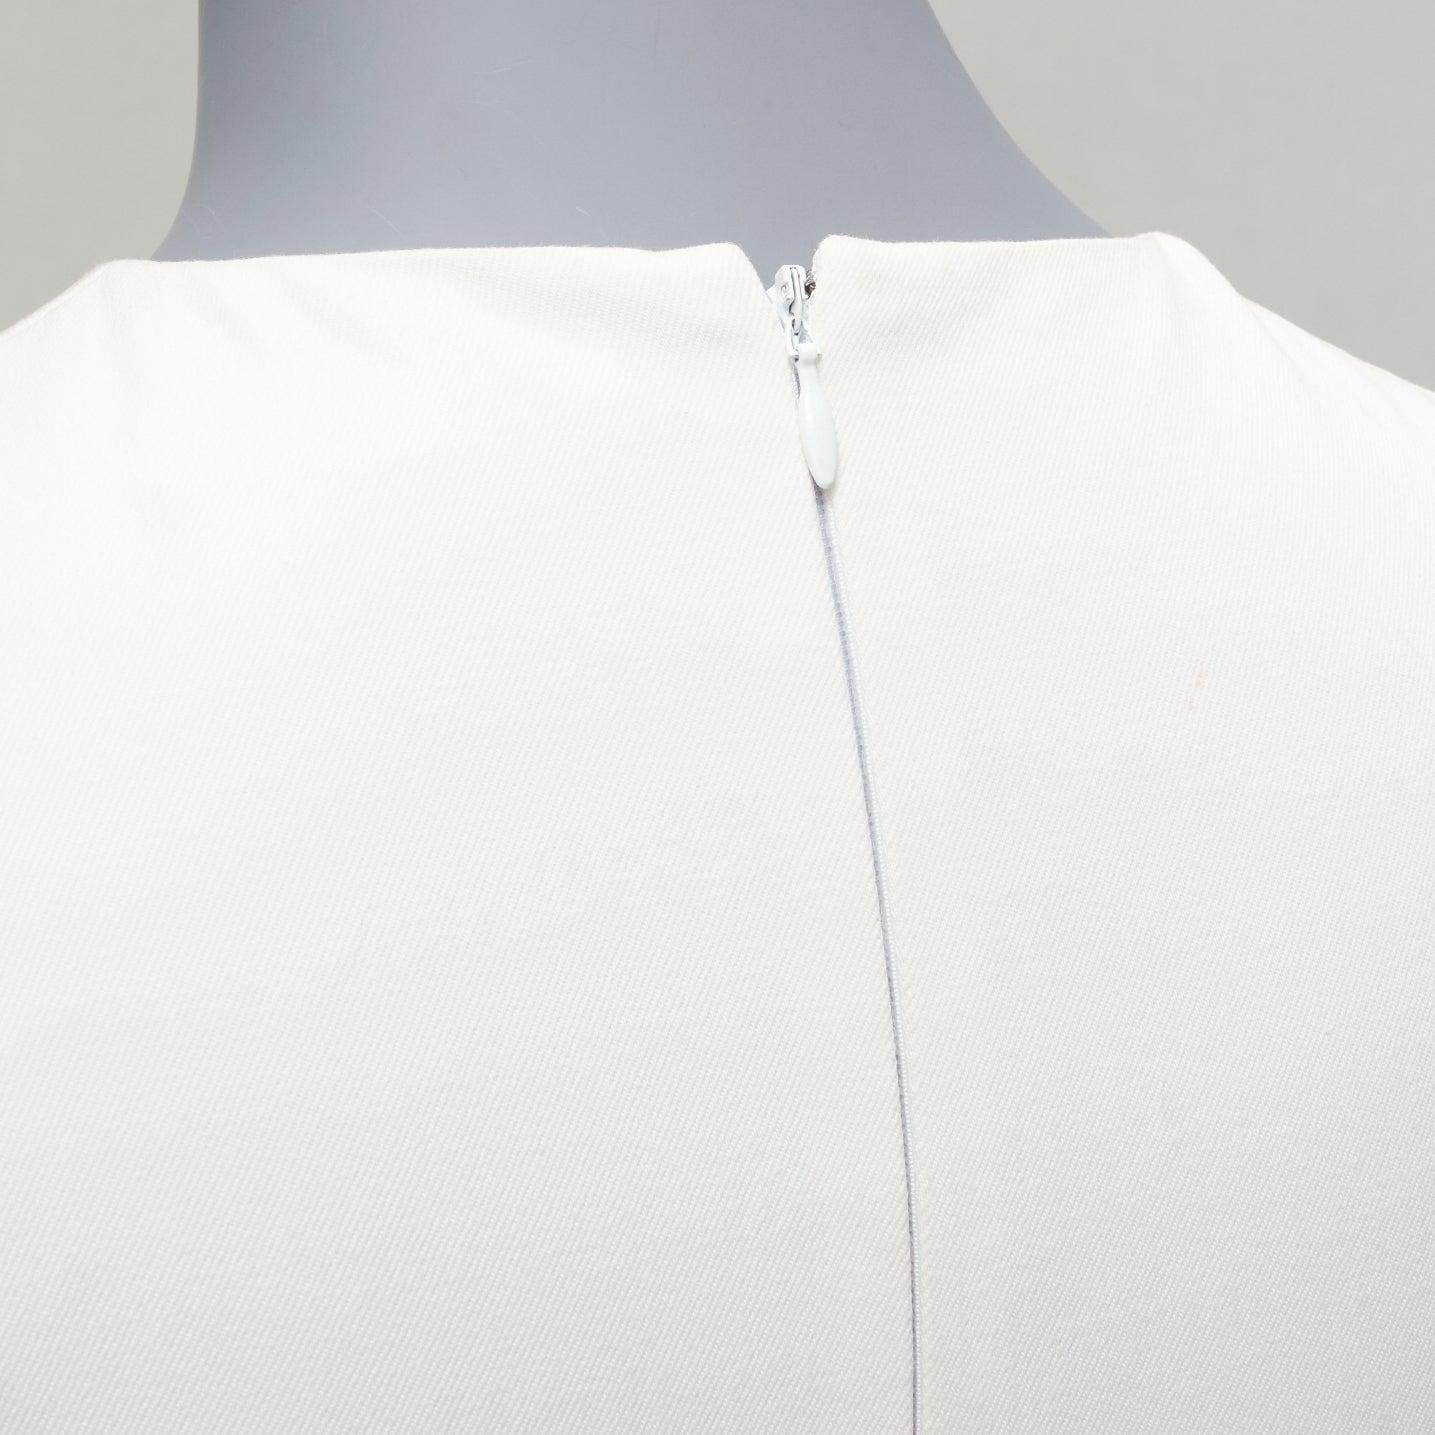 OLD CELINE Phoebe Philo 2012 white cotton peplum sleeveless fitted top FR34 XS For Sale 1